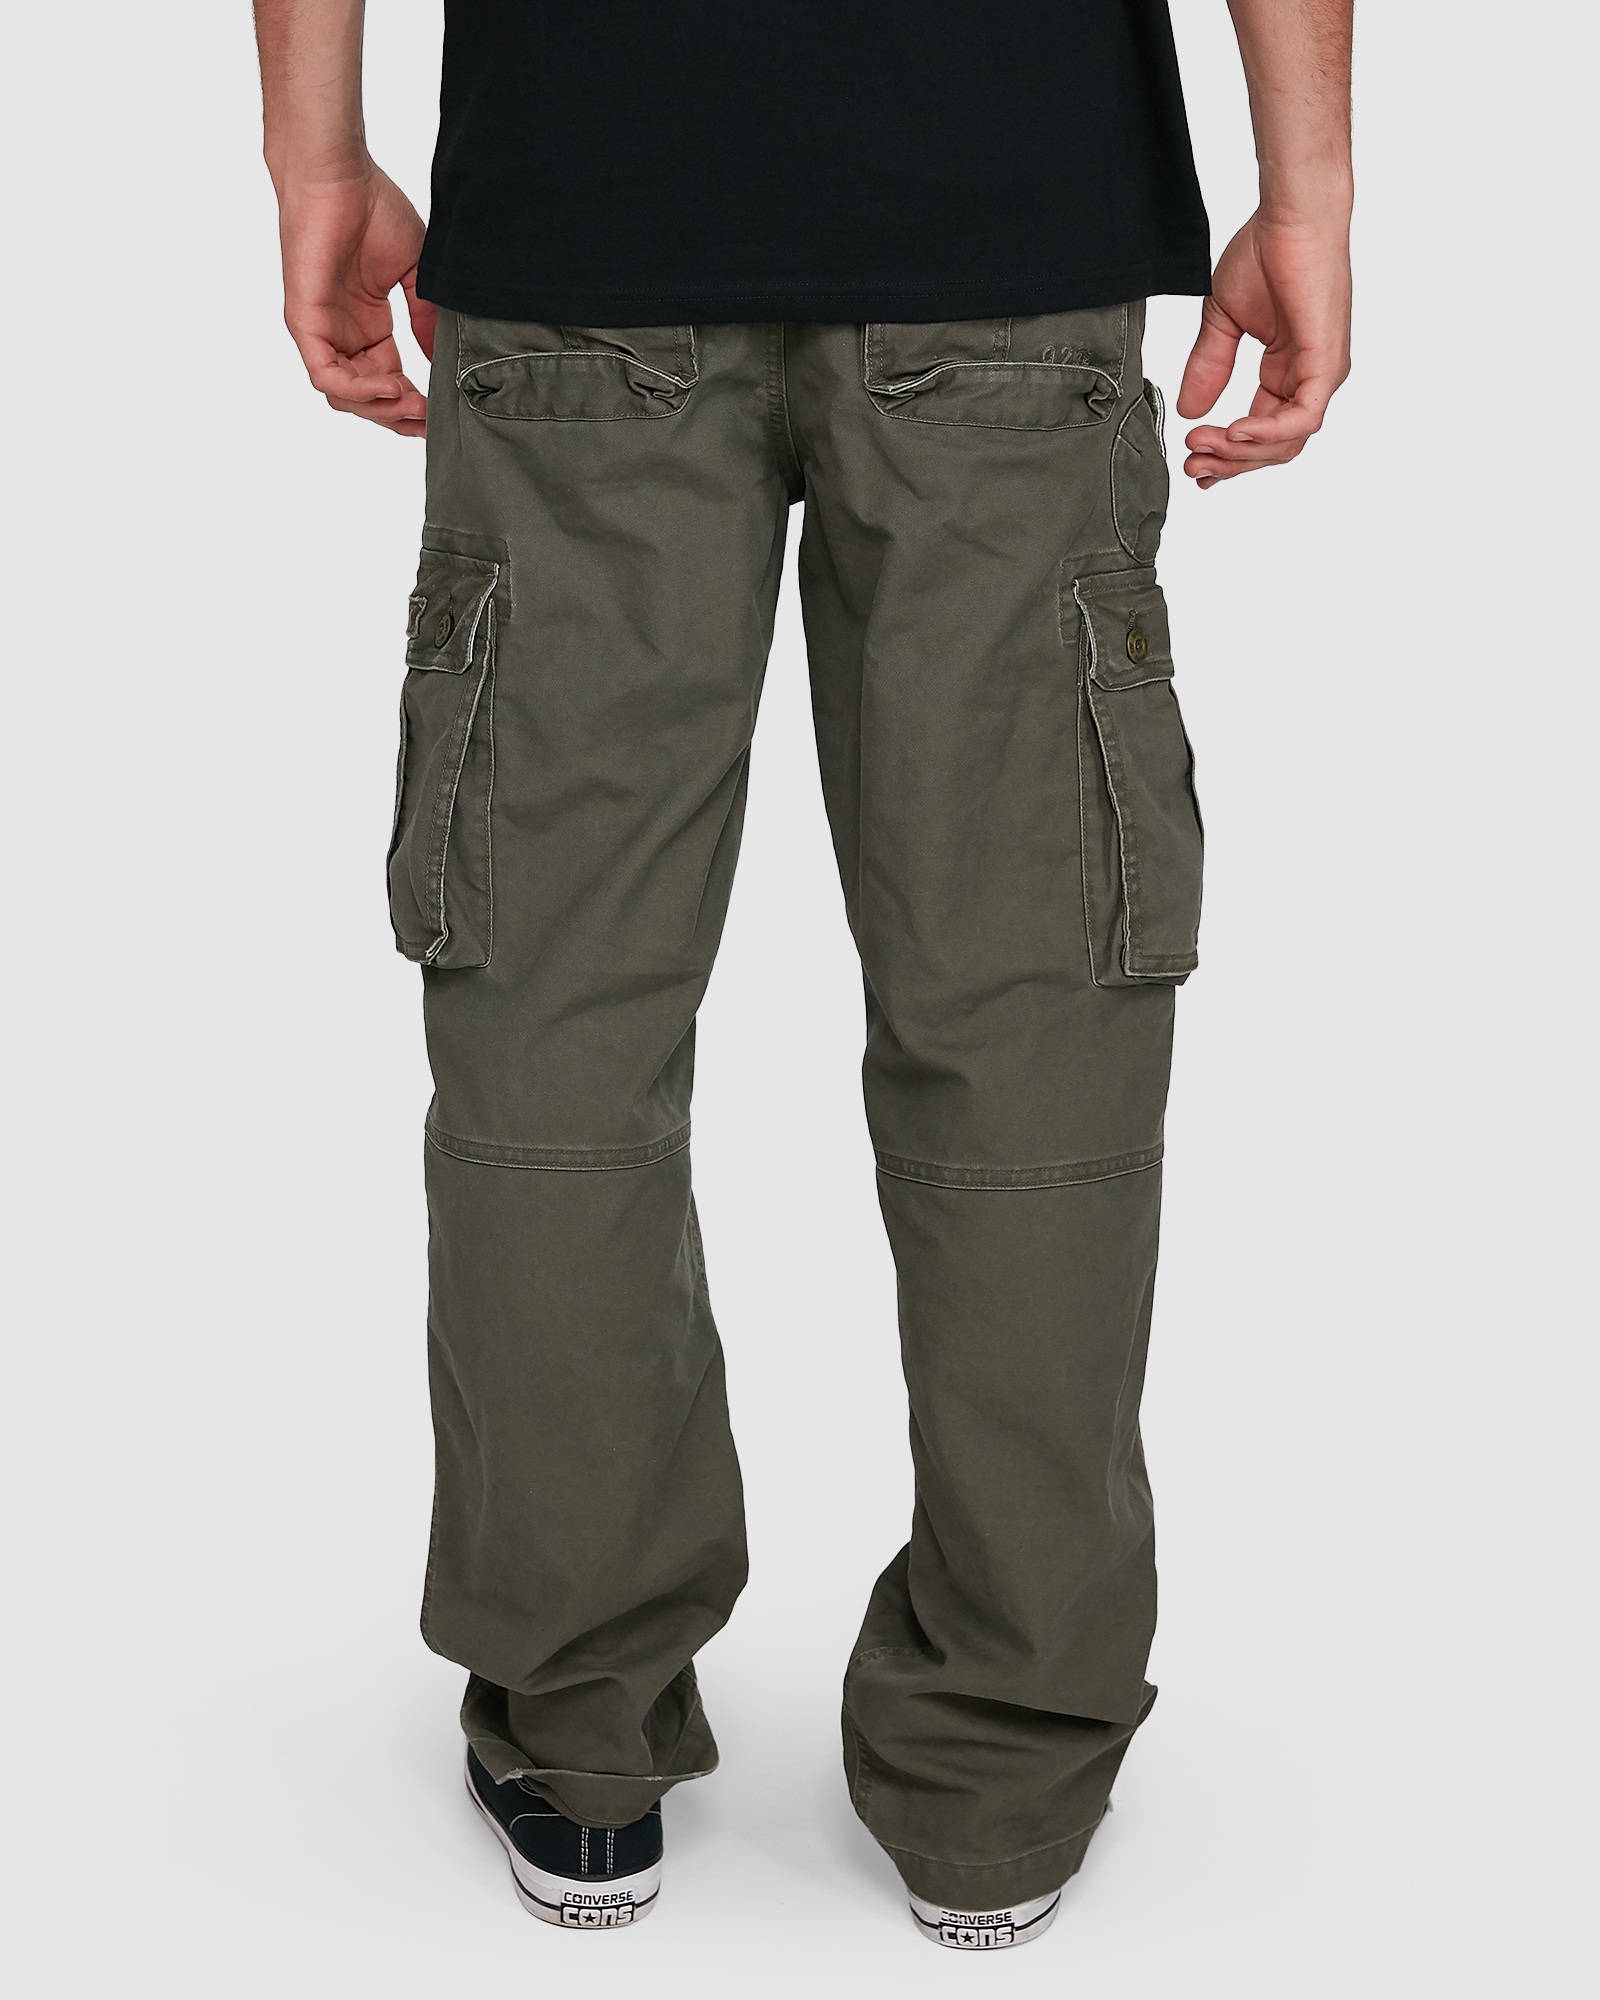 Mens Source Cargo Pant by ELEMENT | Amazon Surf